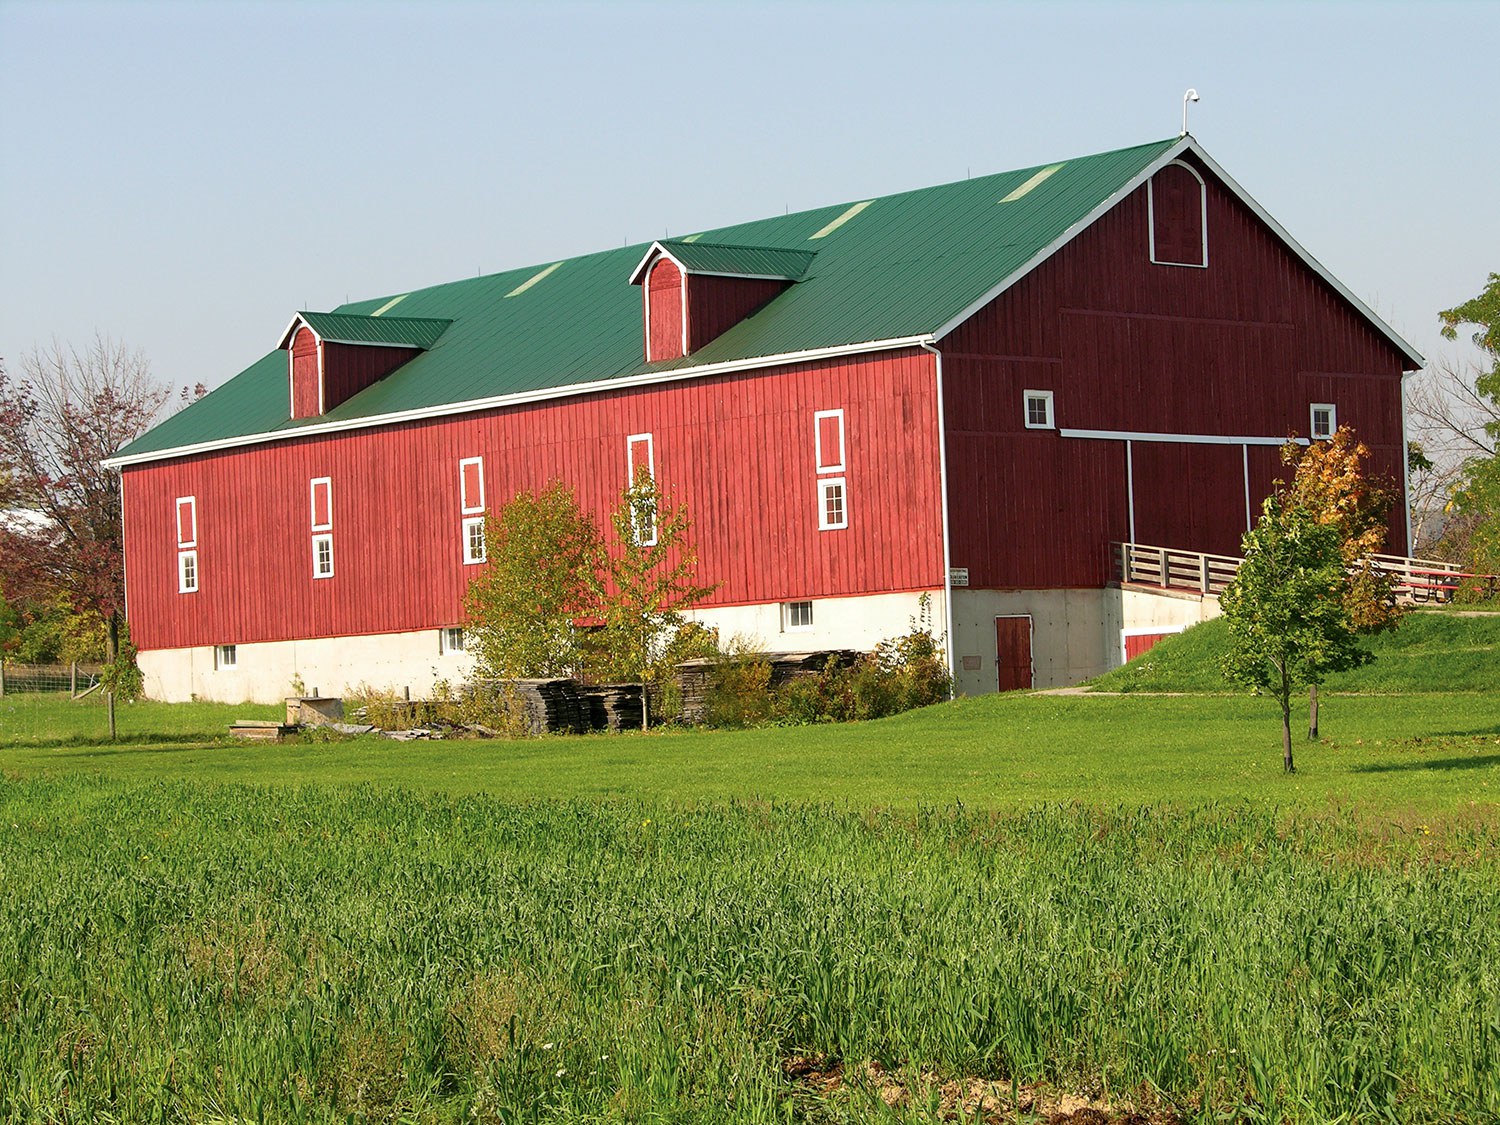 The Elliott-Harrop Barn is one of many buildings to explore at Country Heritage Park.